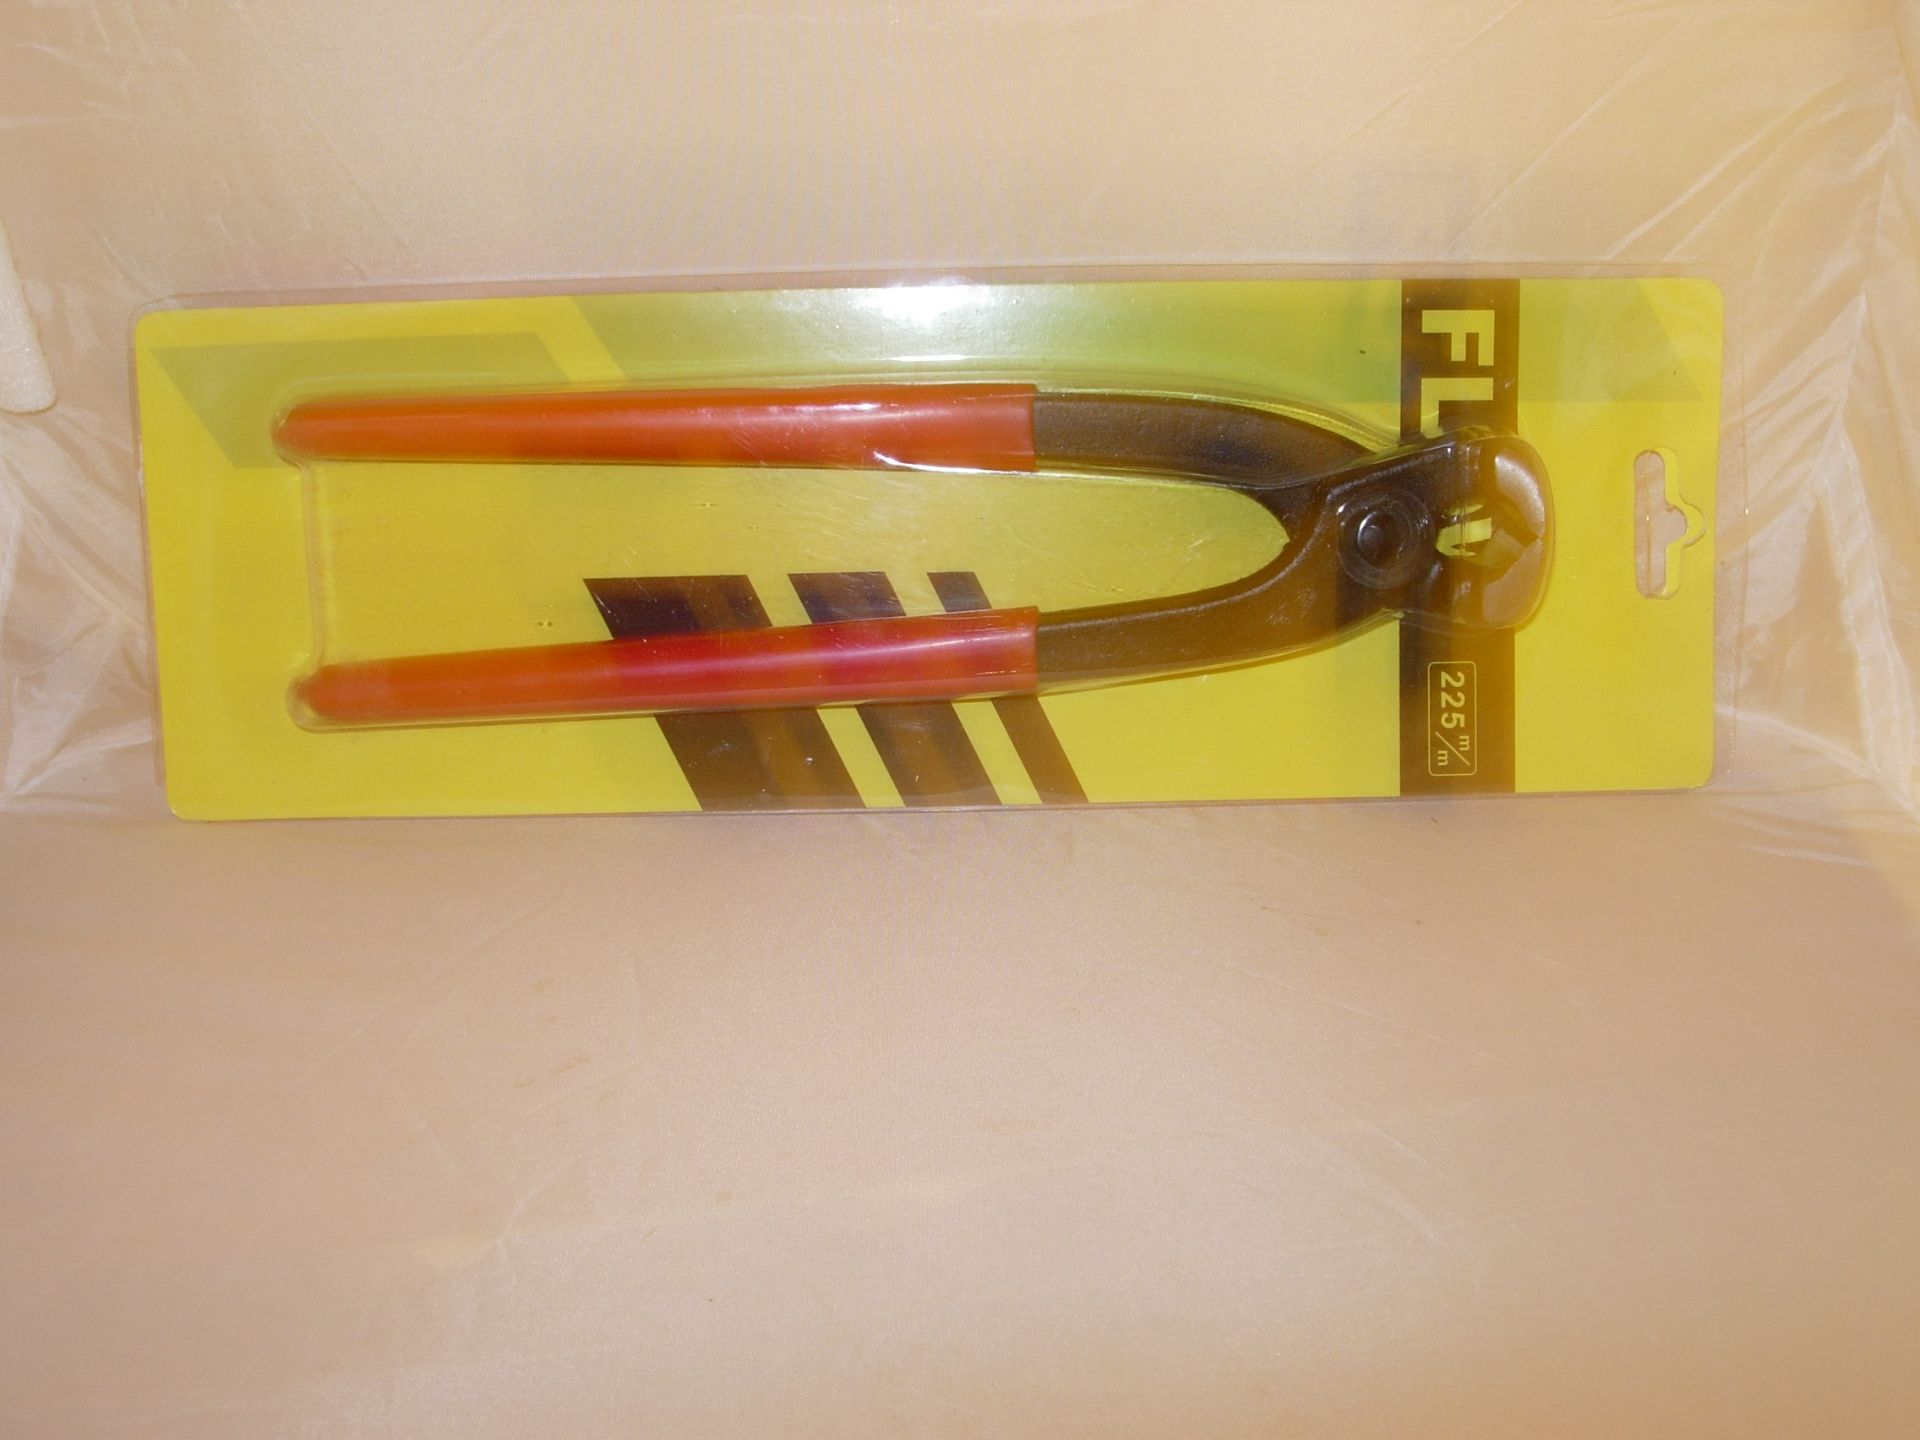 2 Bx Of 5 End Cutting Pliers 225Mm Long